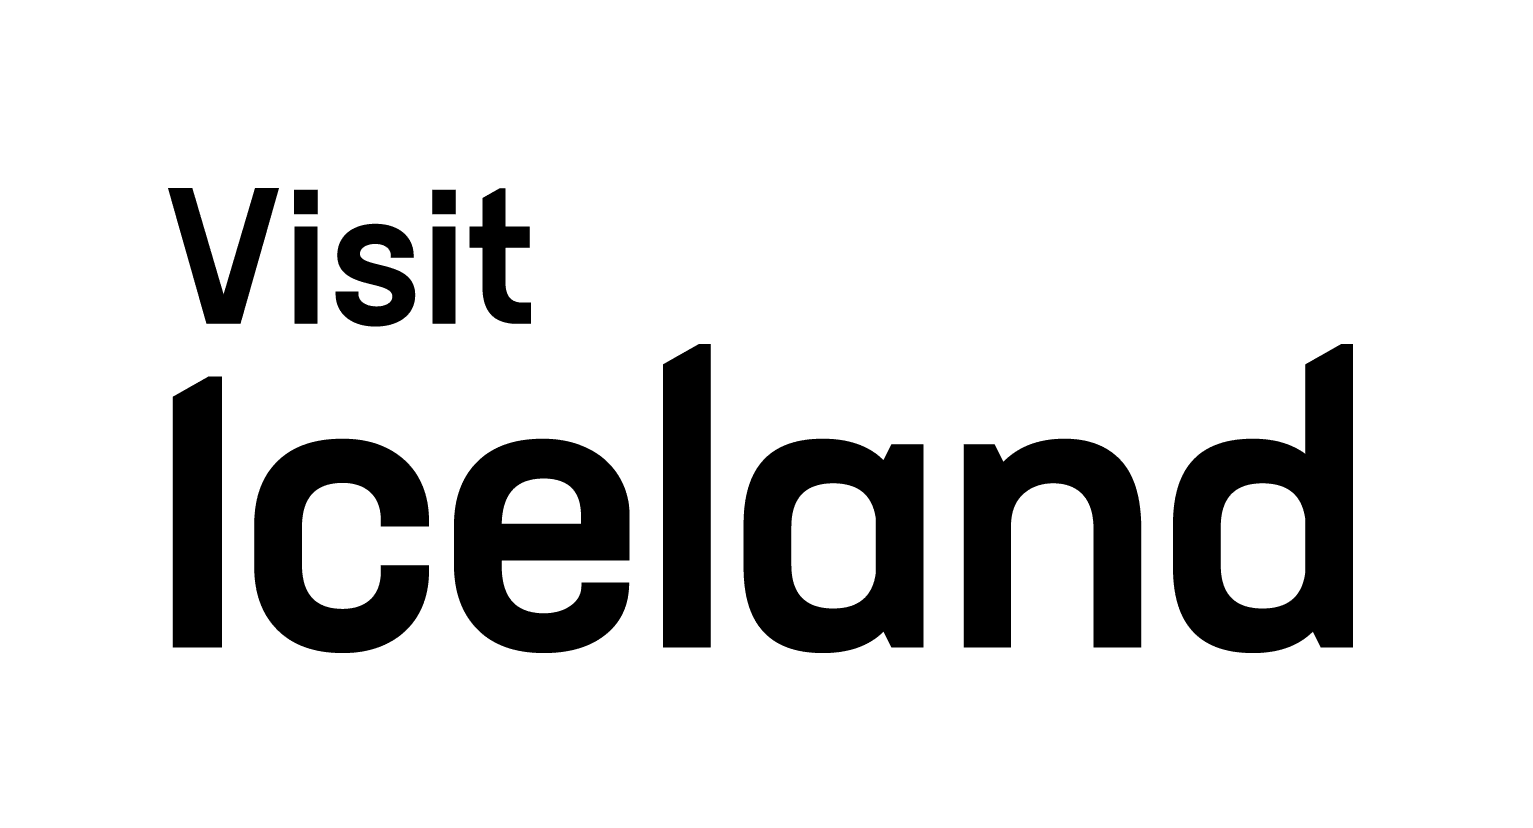 The image is a logo reading Visit Iceland